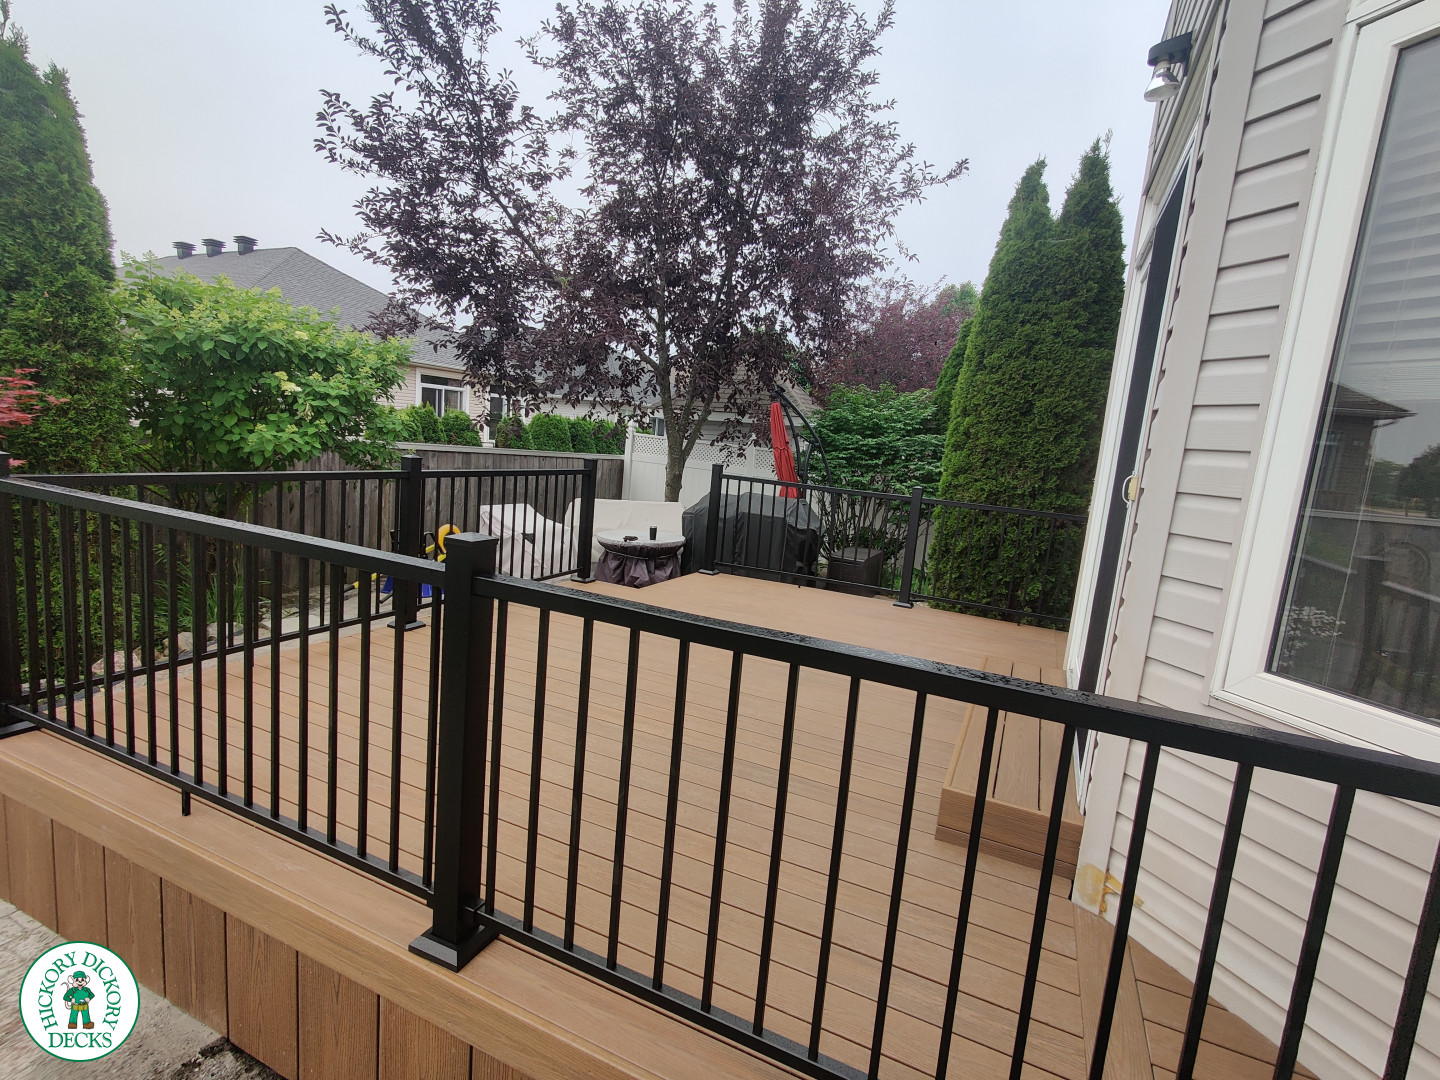 192 square foot fiberon in brown with three steps up to deck and black aluminum railing.